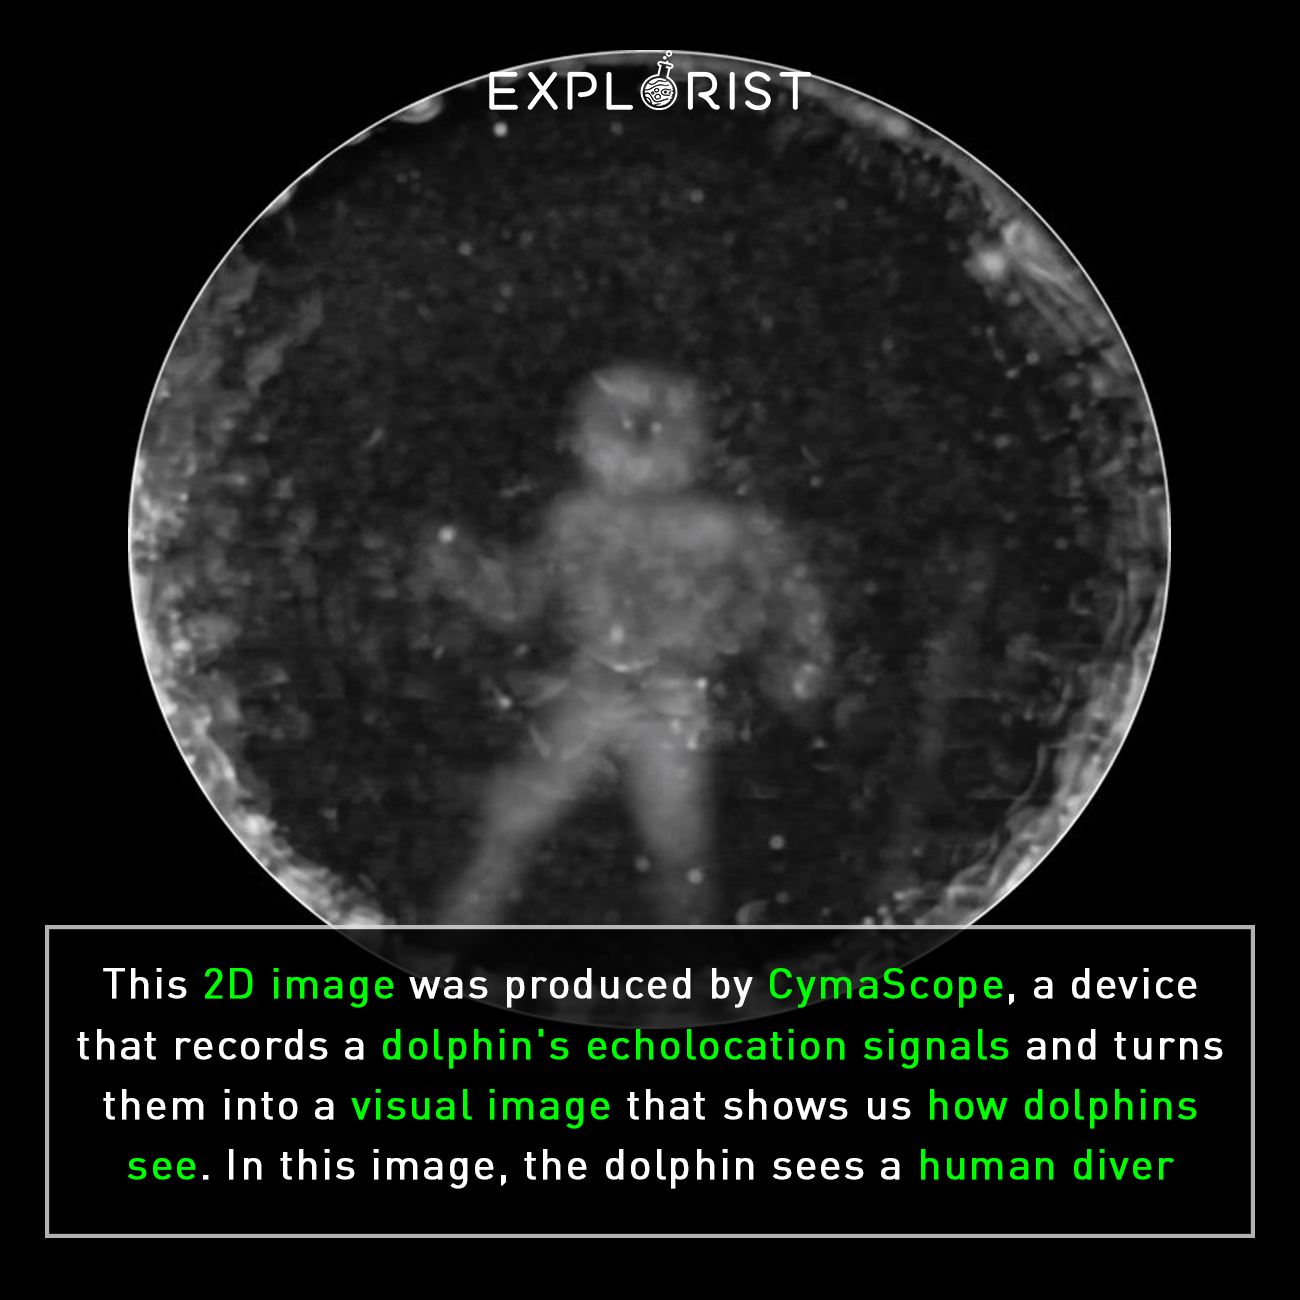 dolphins see - Explorist This 2D image was produced by CymaScope, a device that records a dolphin's echolocation signals and turns them into a visual image that shows us how dolphins see. In this image, the dolphin sees a human diver